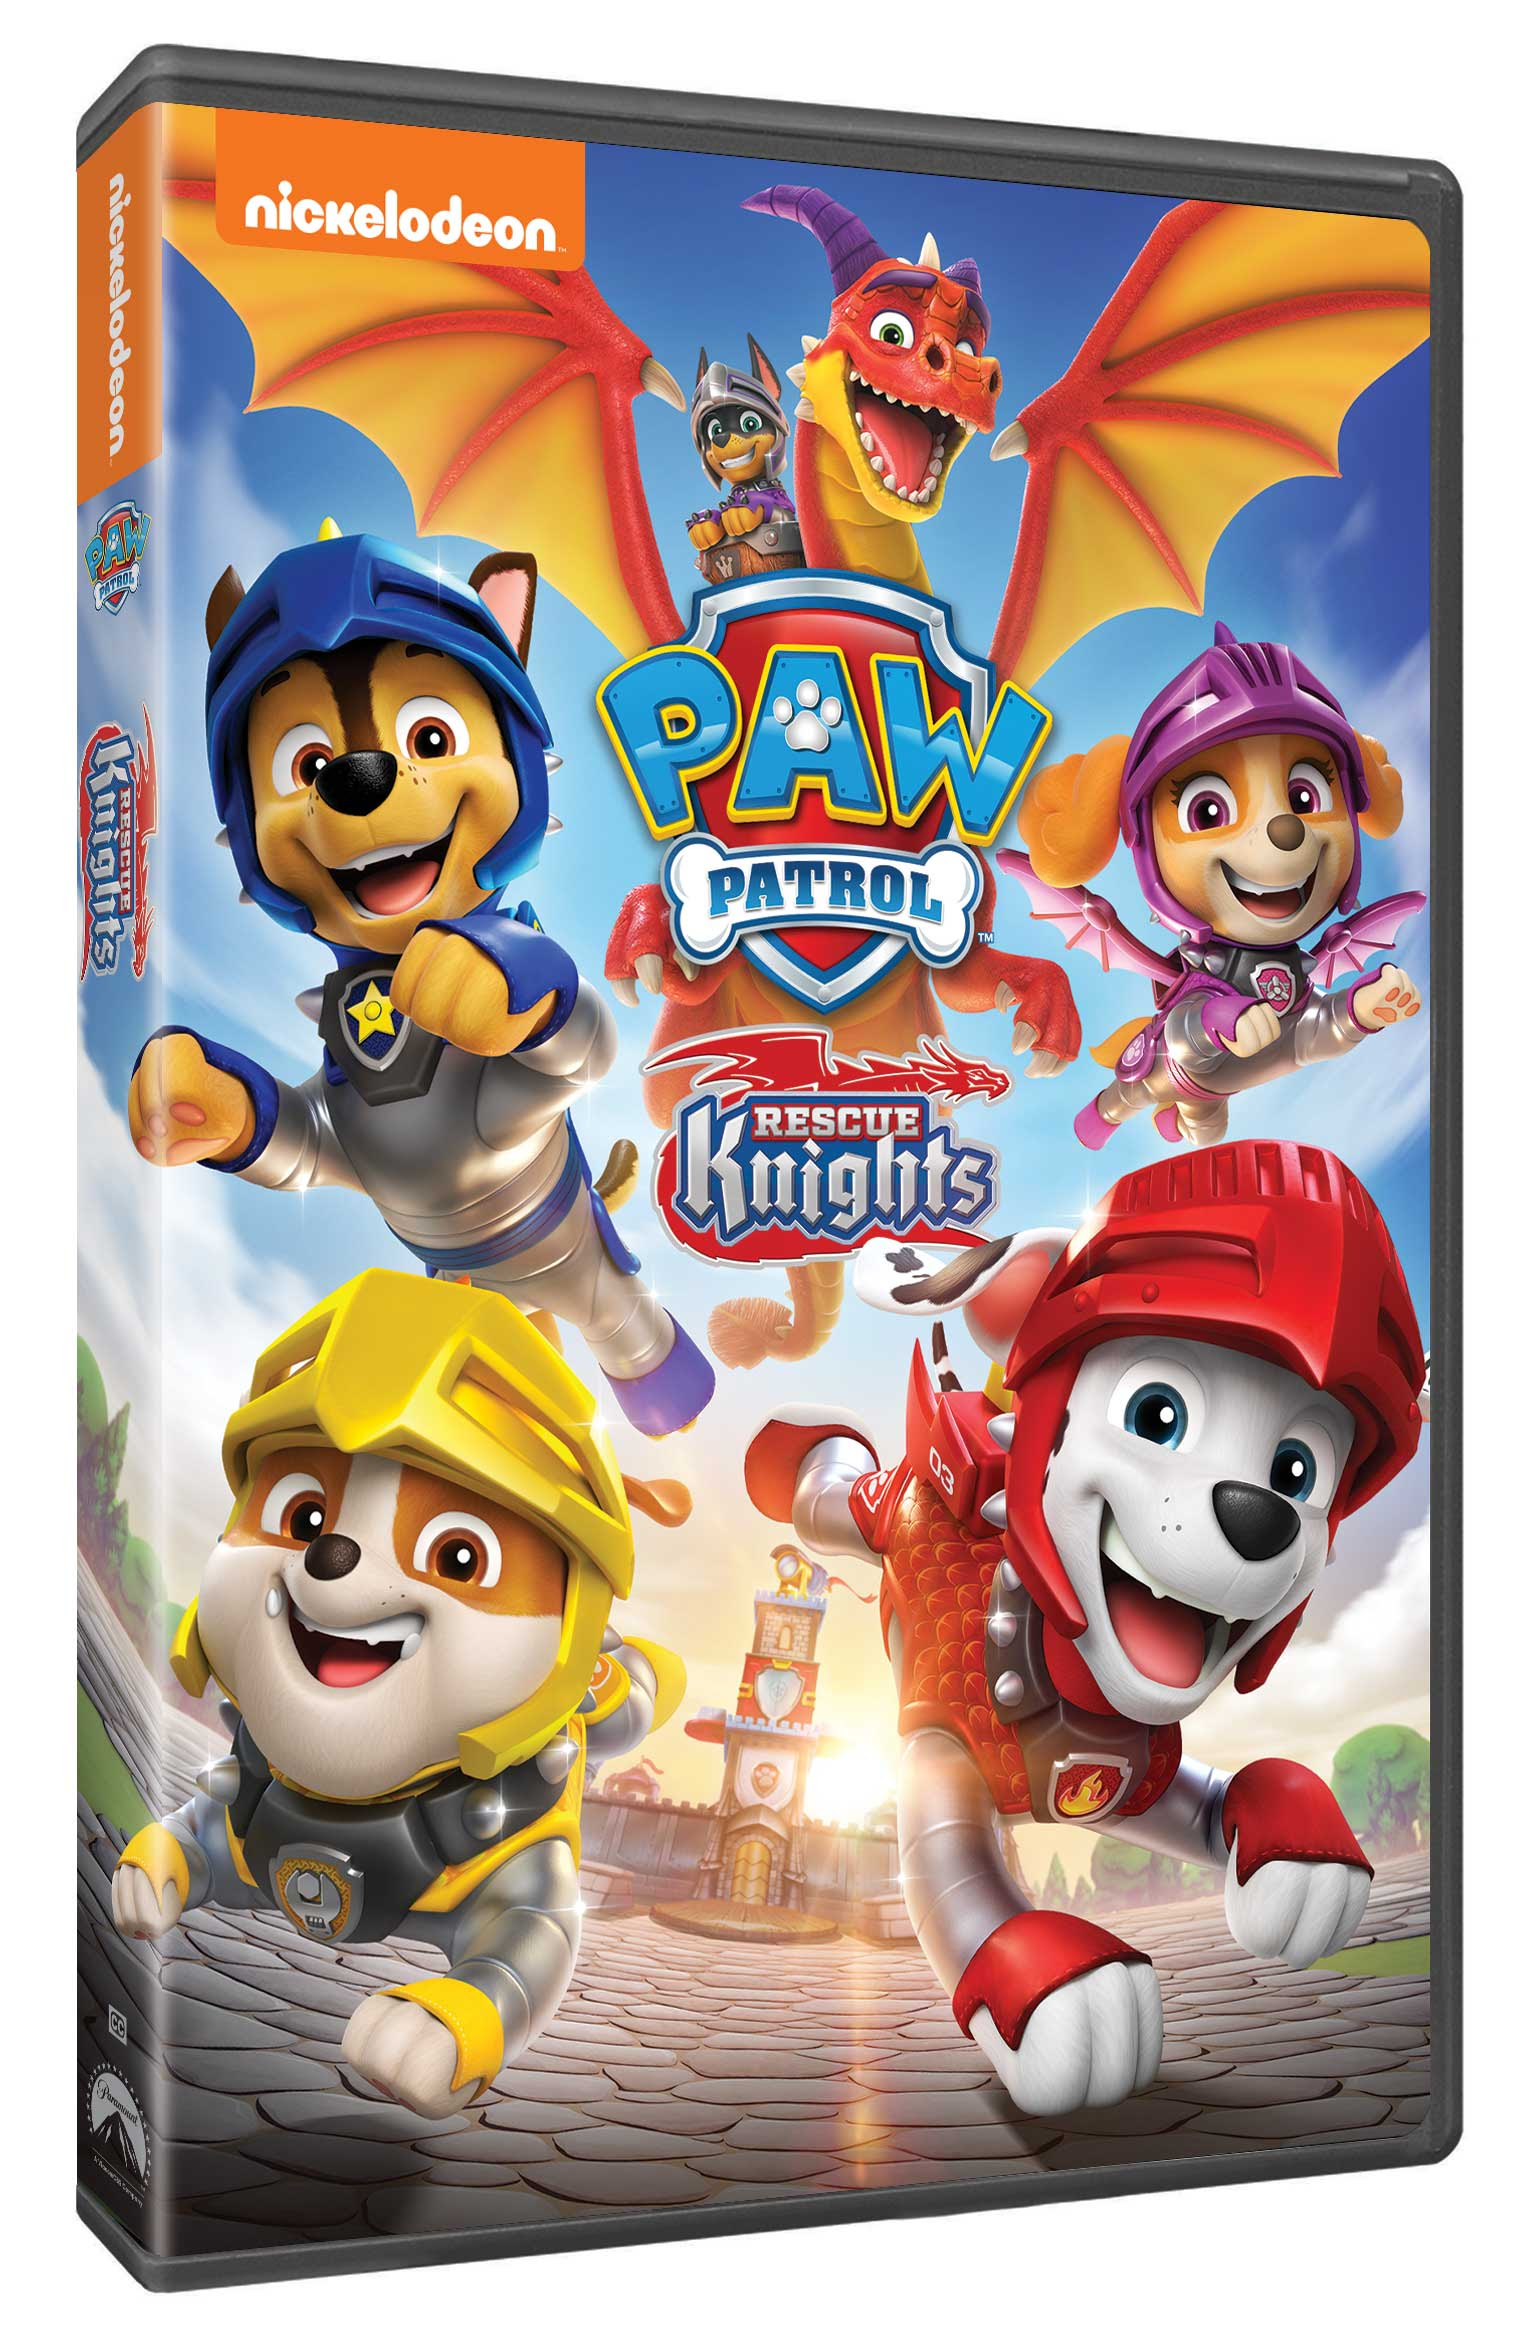 Paw Patrol: Rescue Knights New On DVD!